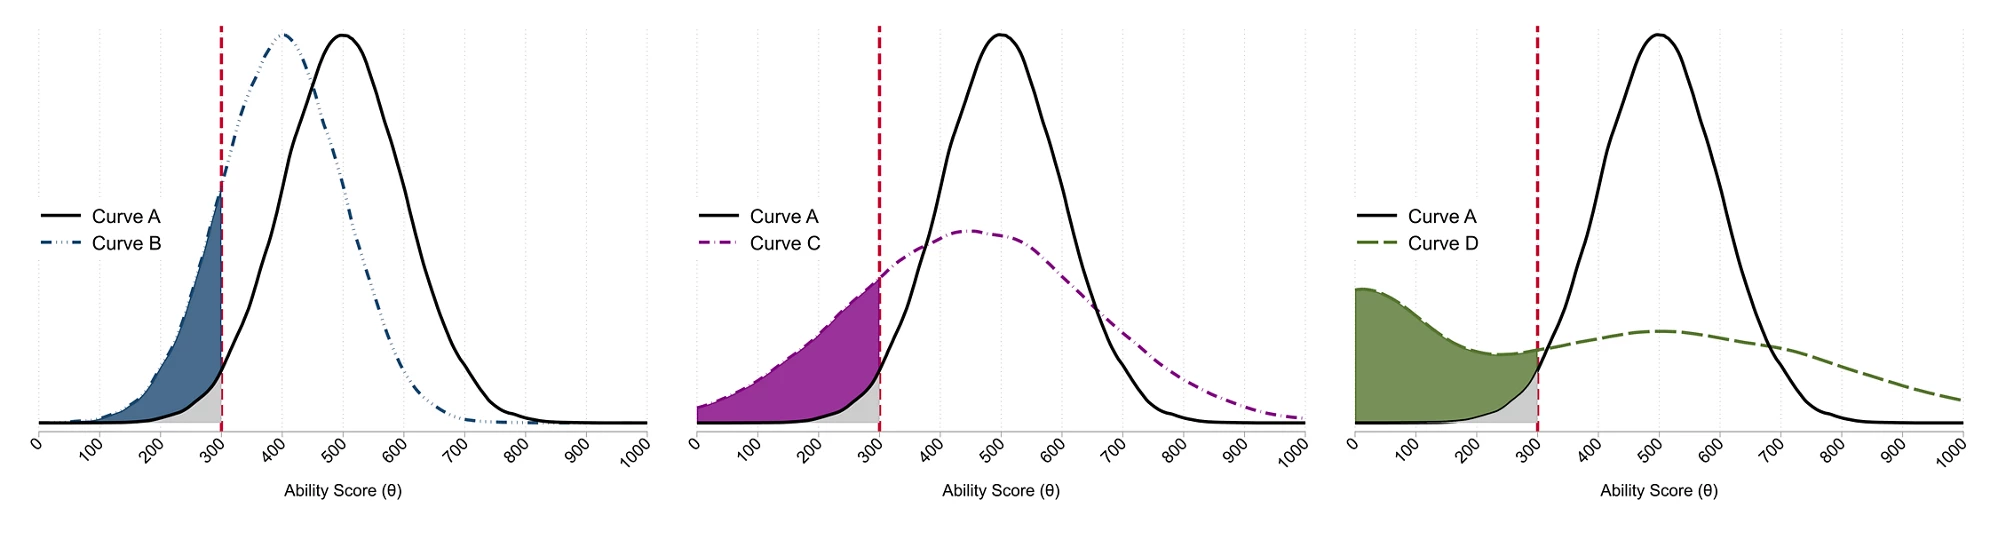 Figure 2 ? Three possible scenarios of how the learning curve may evolve in the coming months: a lower average, a higher standard deviation, or a sharp increase in low learning at the bottom.